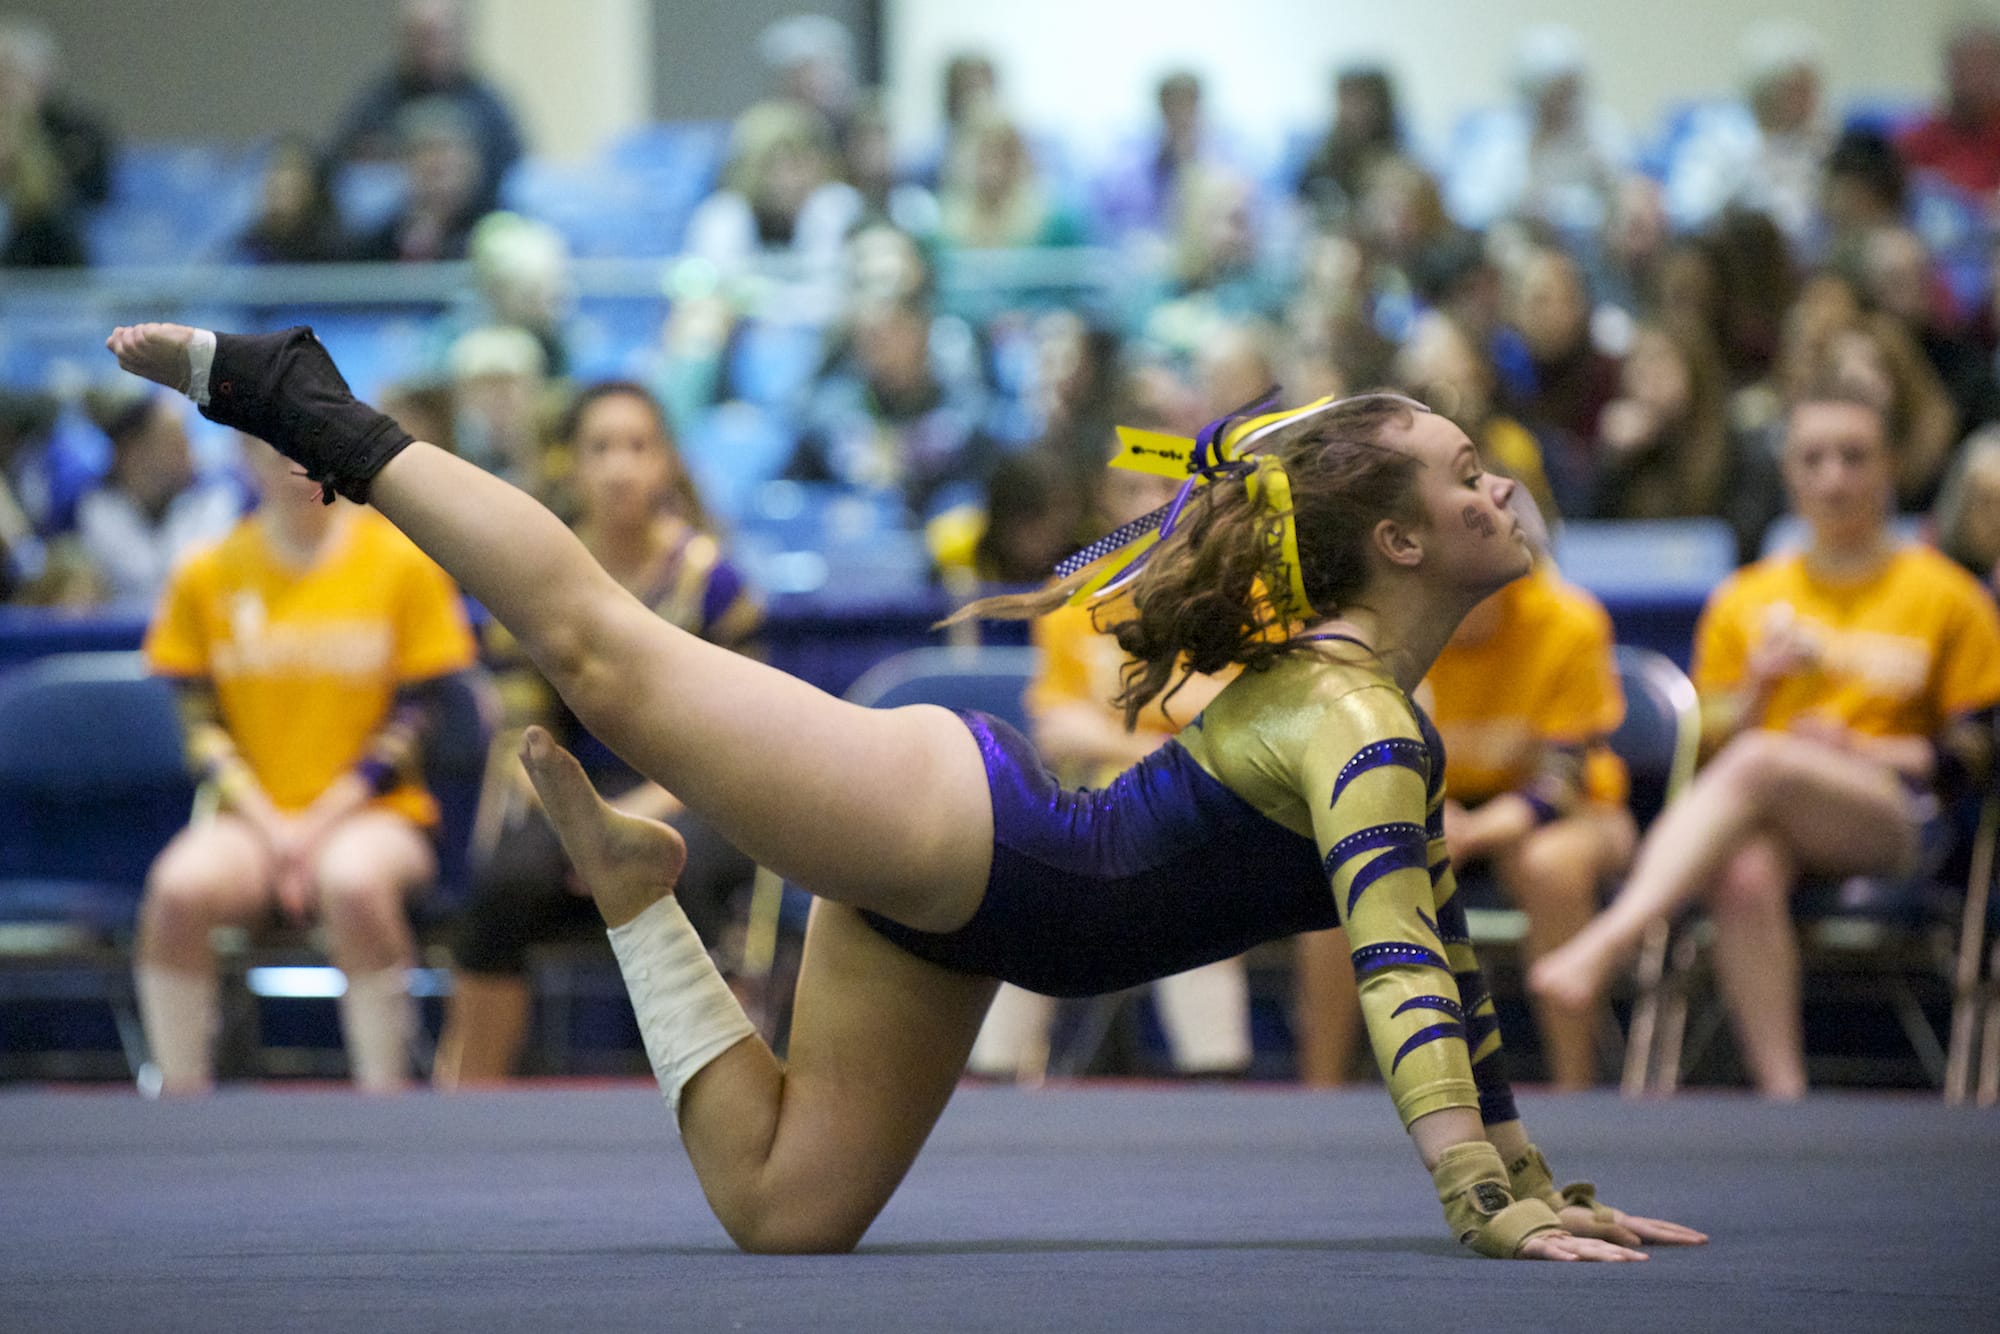 Columbia River's Kenzie Moxley, competing on the floor excercise, helped the Chieftains to a fifth place finish last year at the state gymnastics meet in Tacoma.